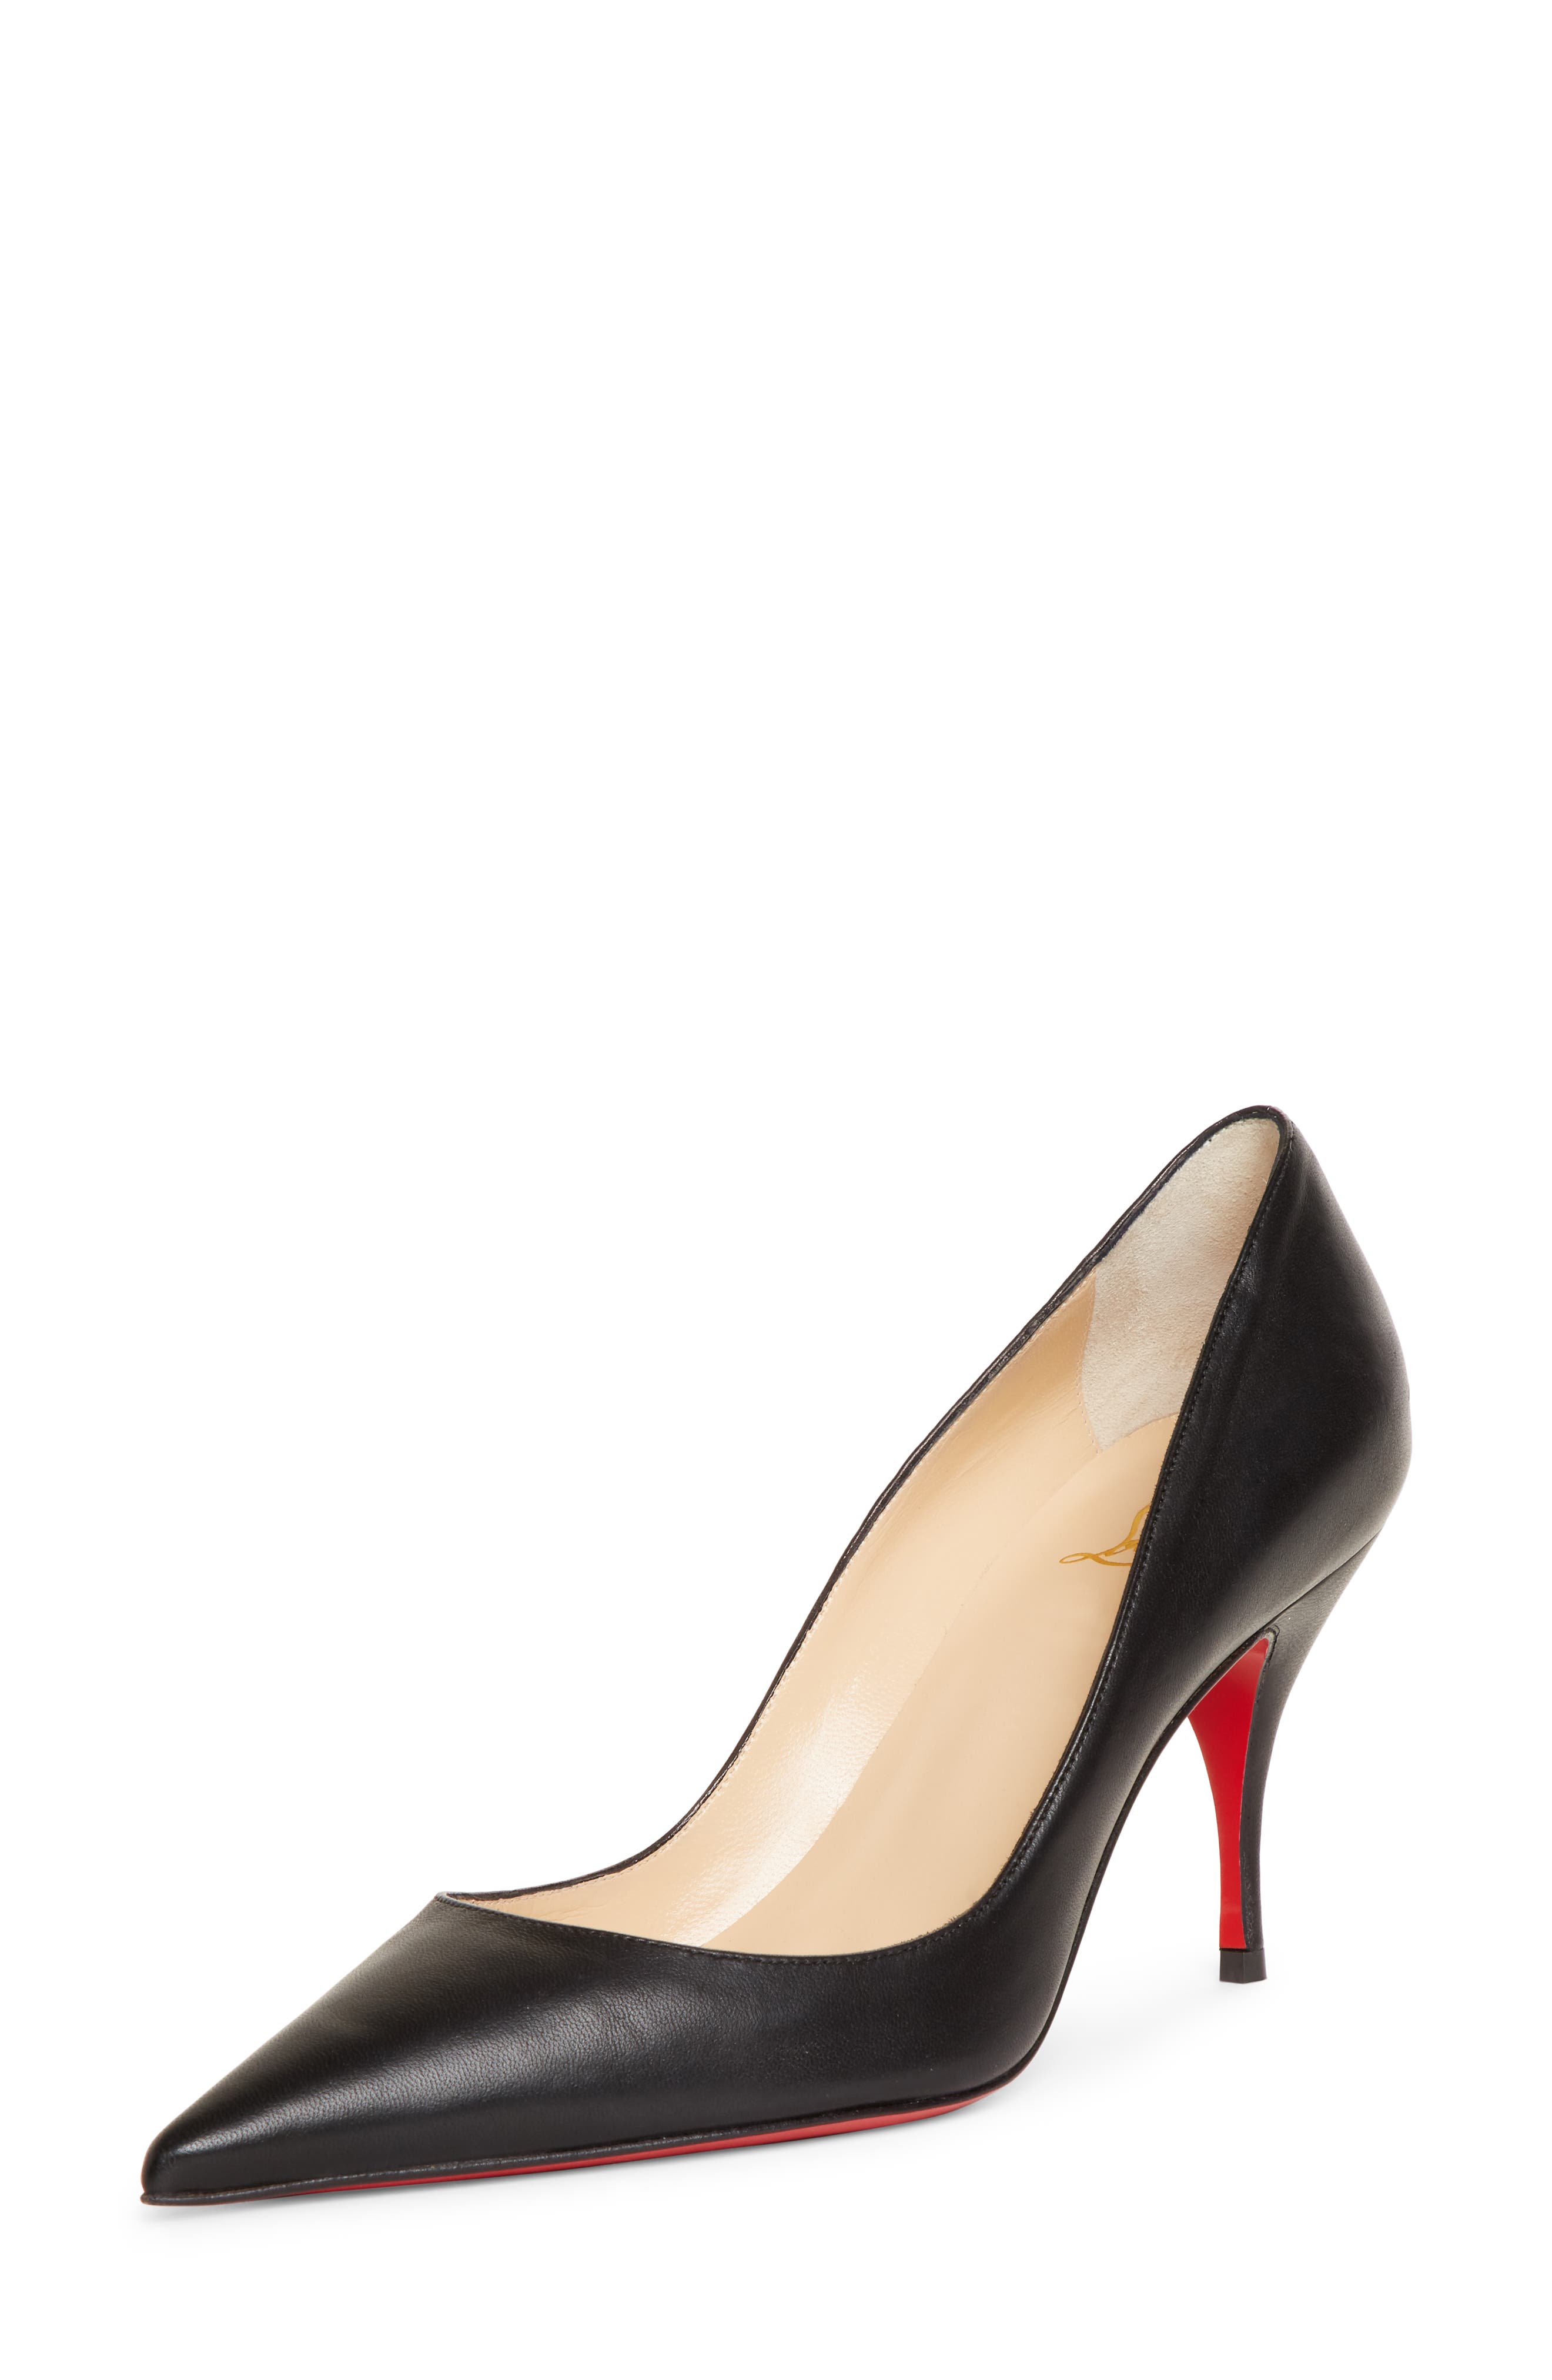 nordstrom rack louboutin shoes